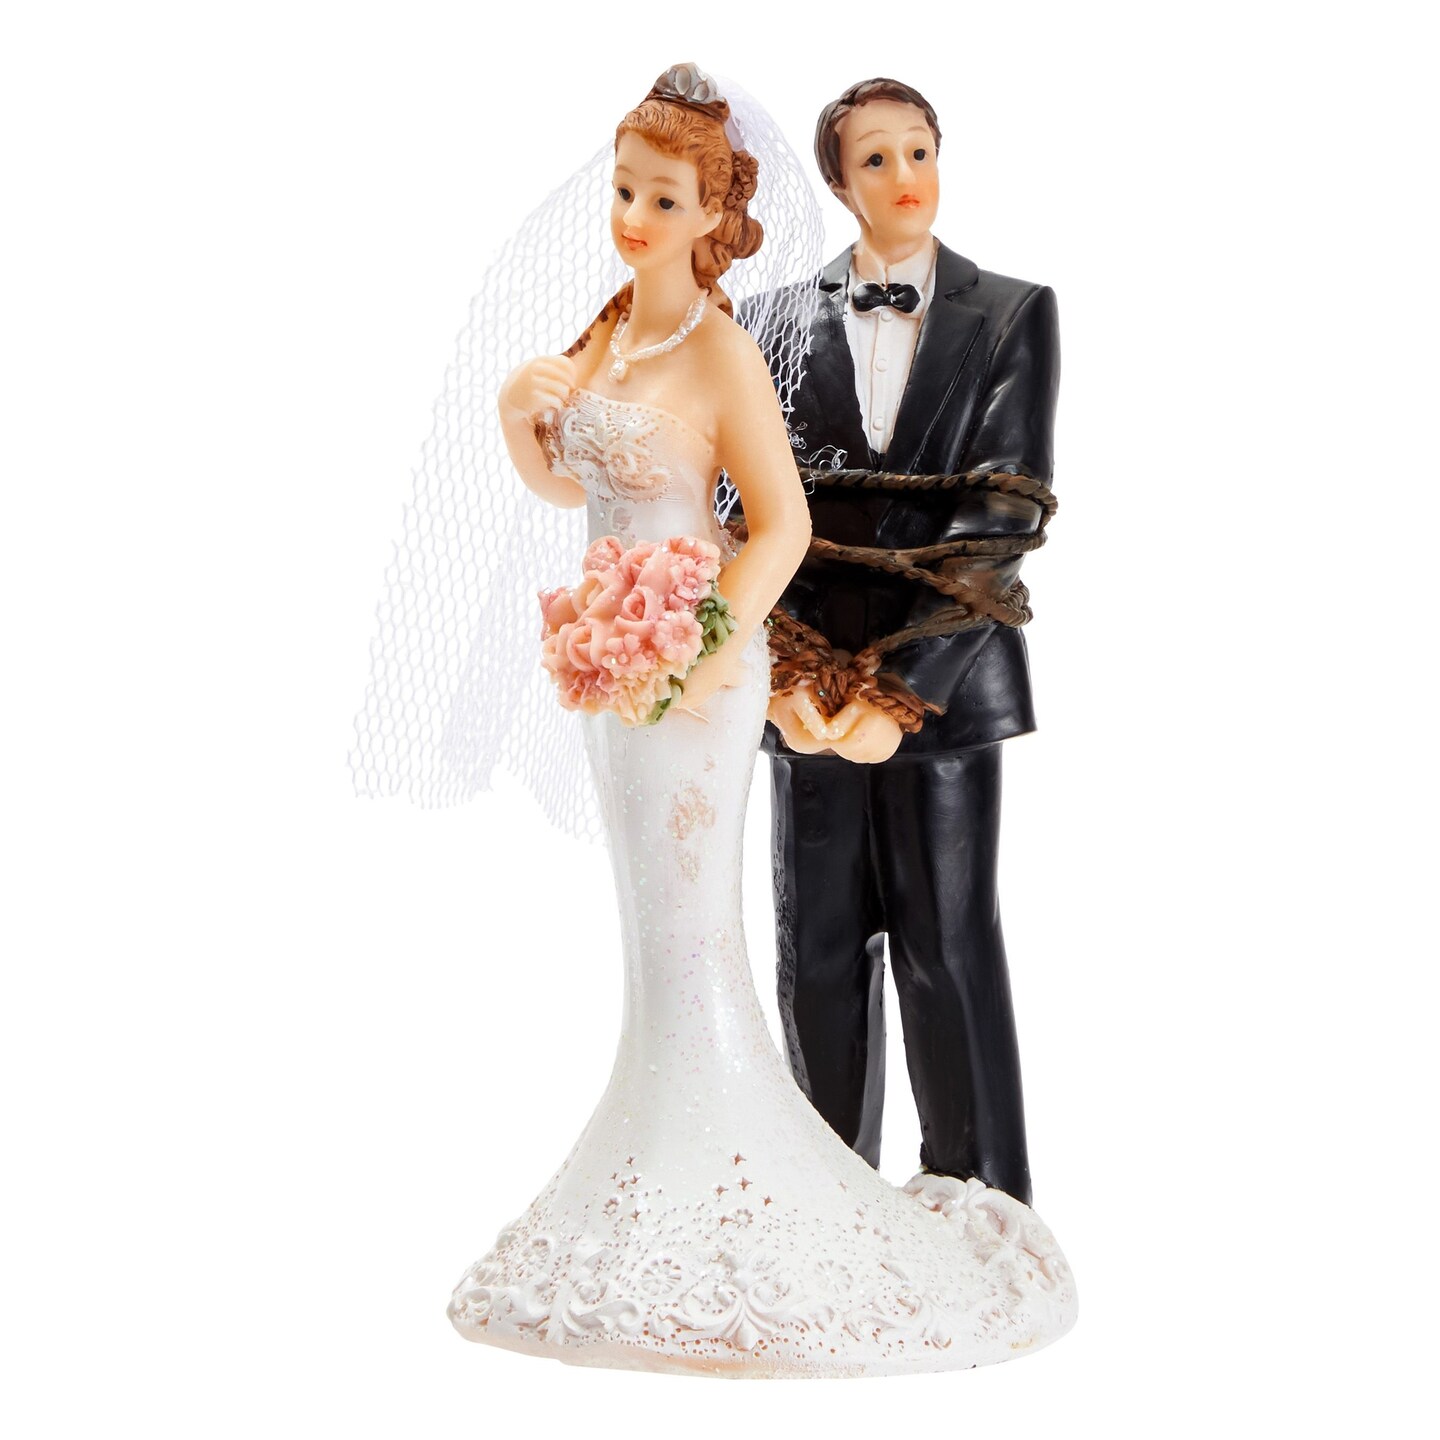 Funny Groom's Cake Toppers | LoveToKnow